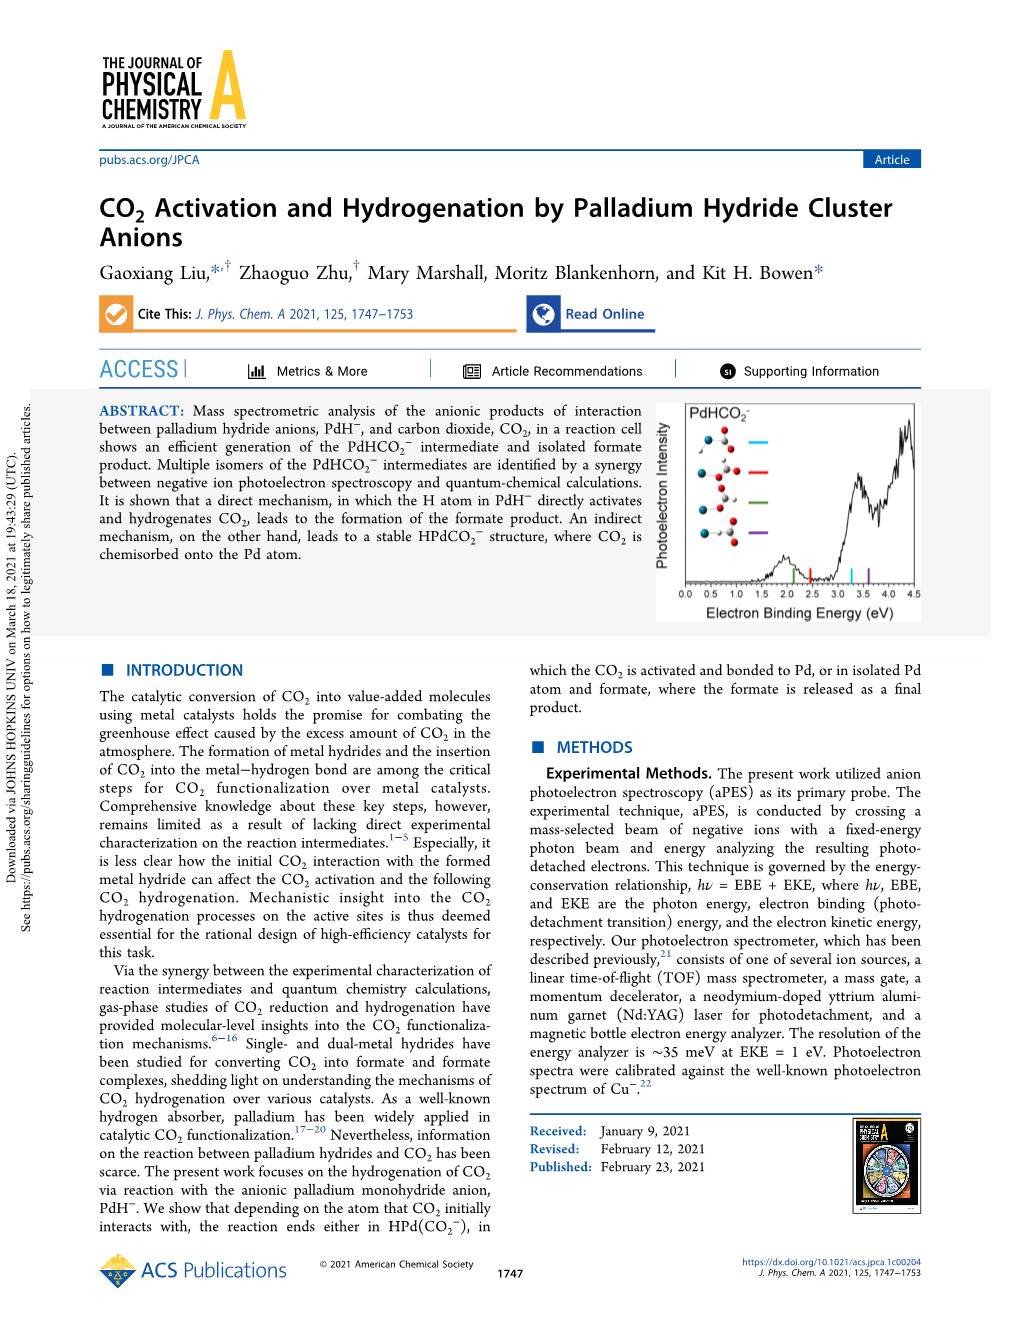 CO2 Activation and Hydrogenation by Palladium Hydride Cluster Anions † † Gaoxiang Liu,*, Zhaoguo Zhu, Mary Marshall, Moritz Blankenhorn, and Kit H